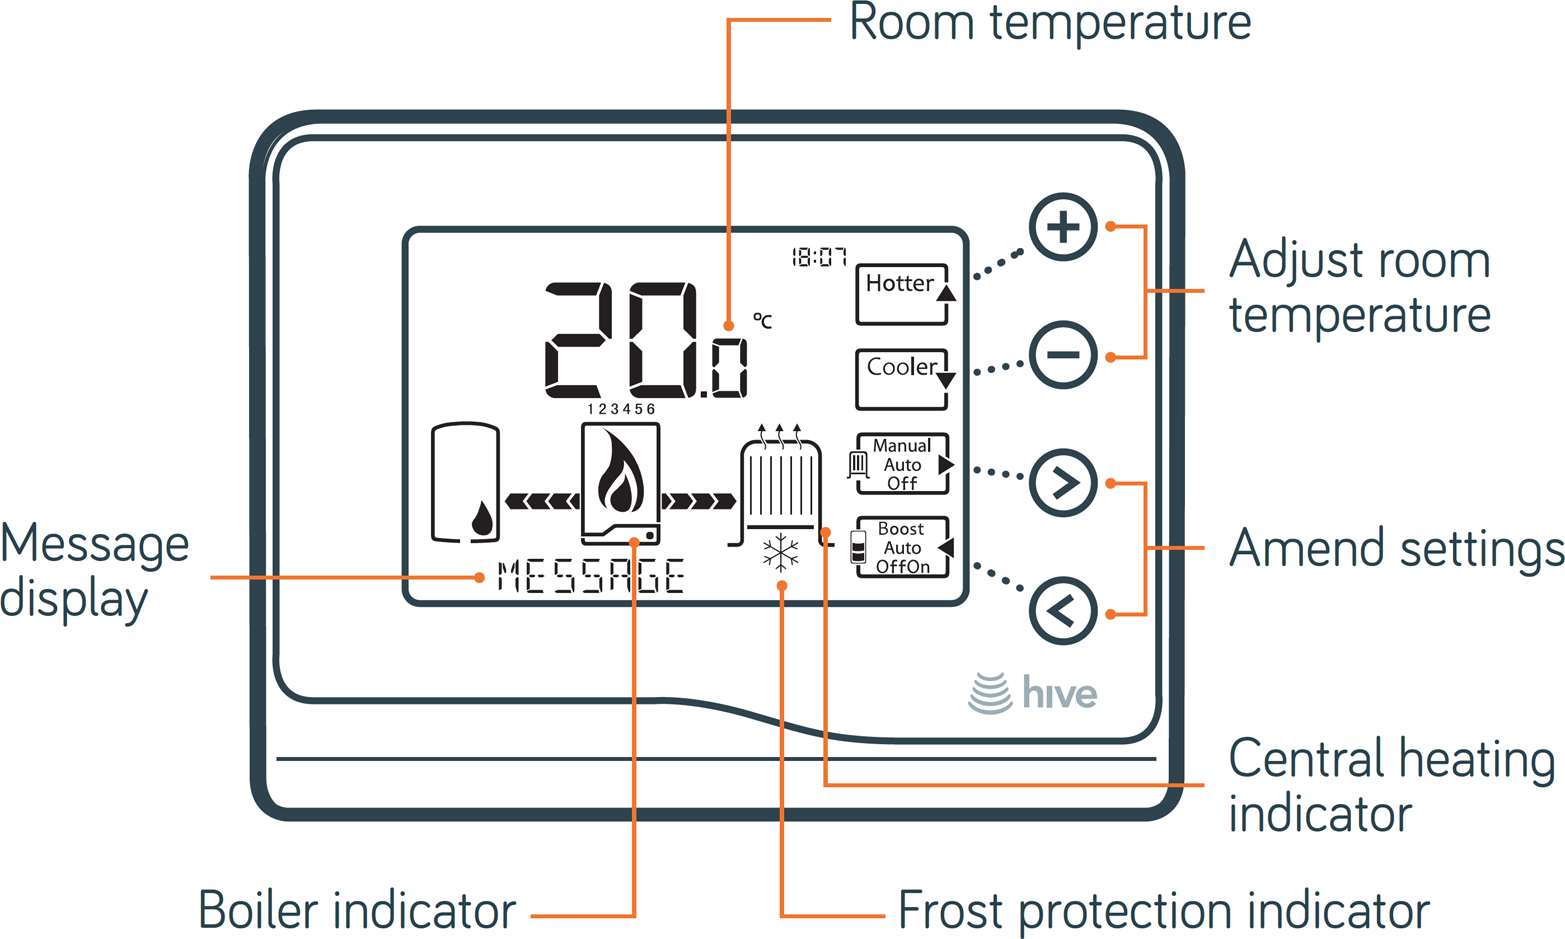 Design for a thermostat LCD display combining fixed segments and a character set; the message display is dynamic, but all the graphical elements need to be designed into the screen prior to manufacturing—there is no option to change them later (image: British Gas).